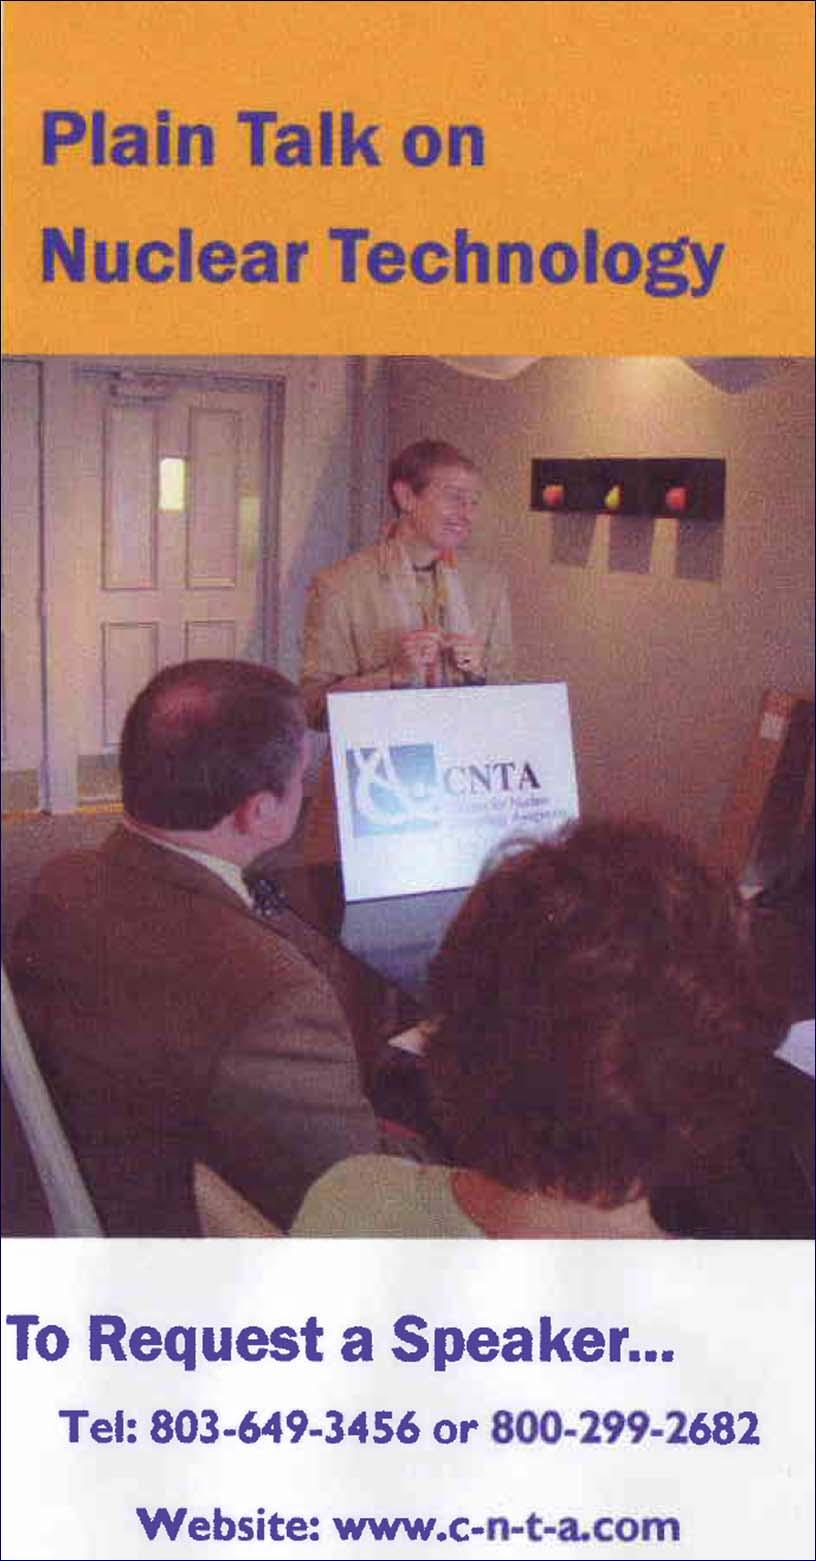 CNTA Speakers Bureau CNTA speakers are experts on all aspects of nuclear energy, the role of nuclear technology in the nation's defense